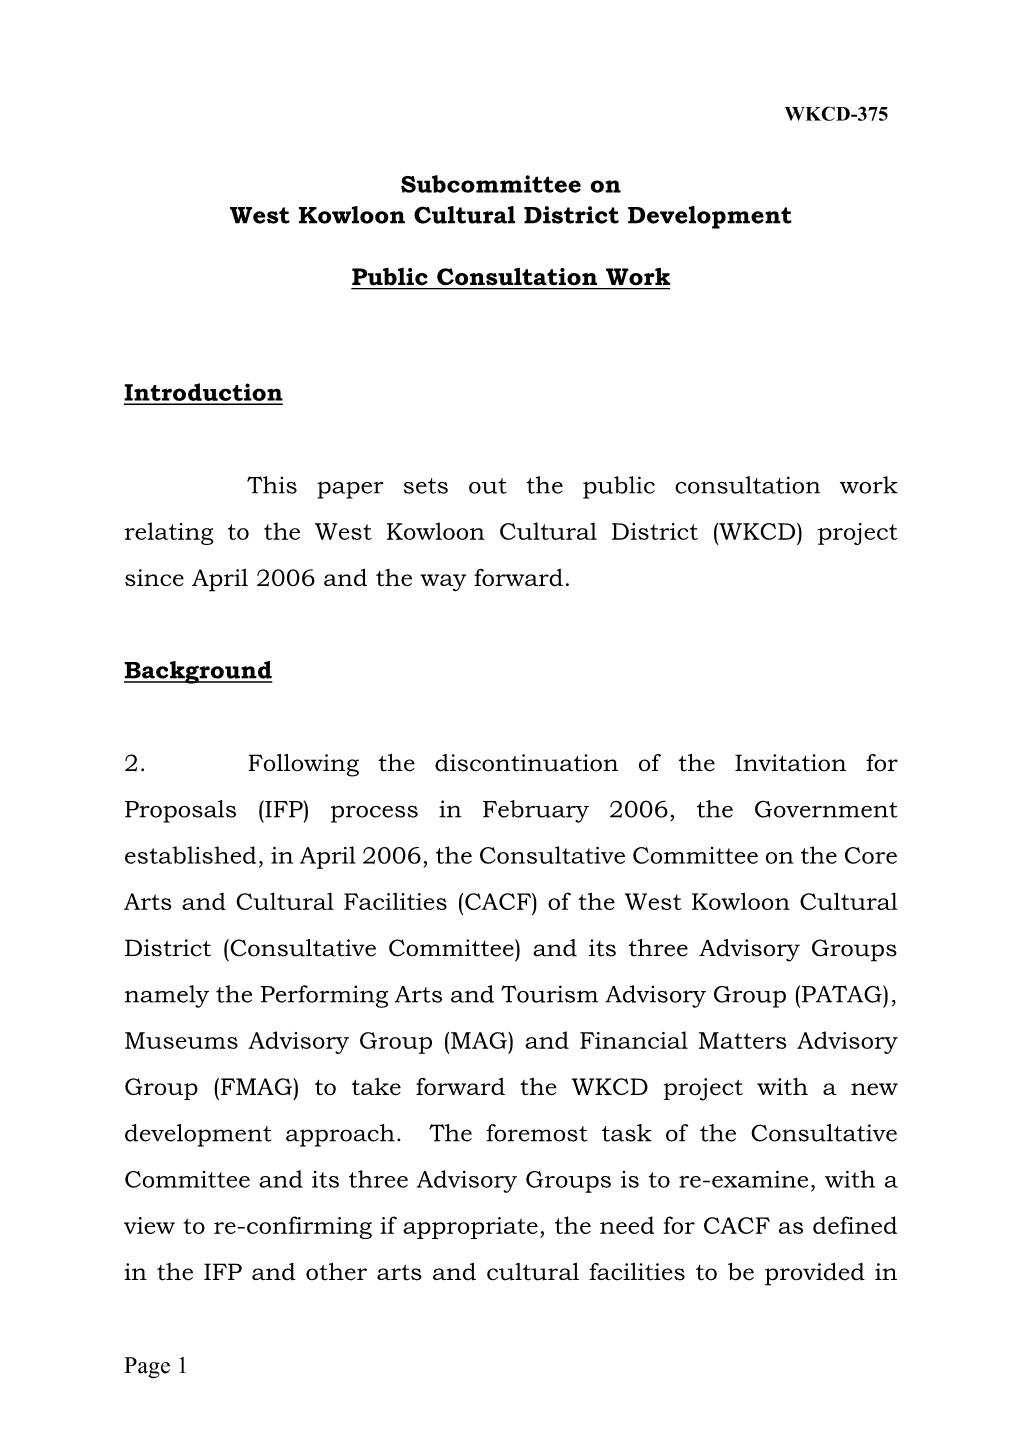 Page 1 Subcommittee on West Kowloon Cultural District